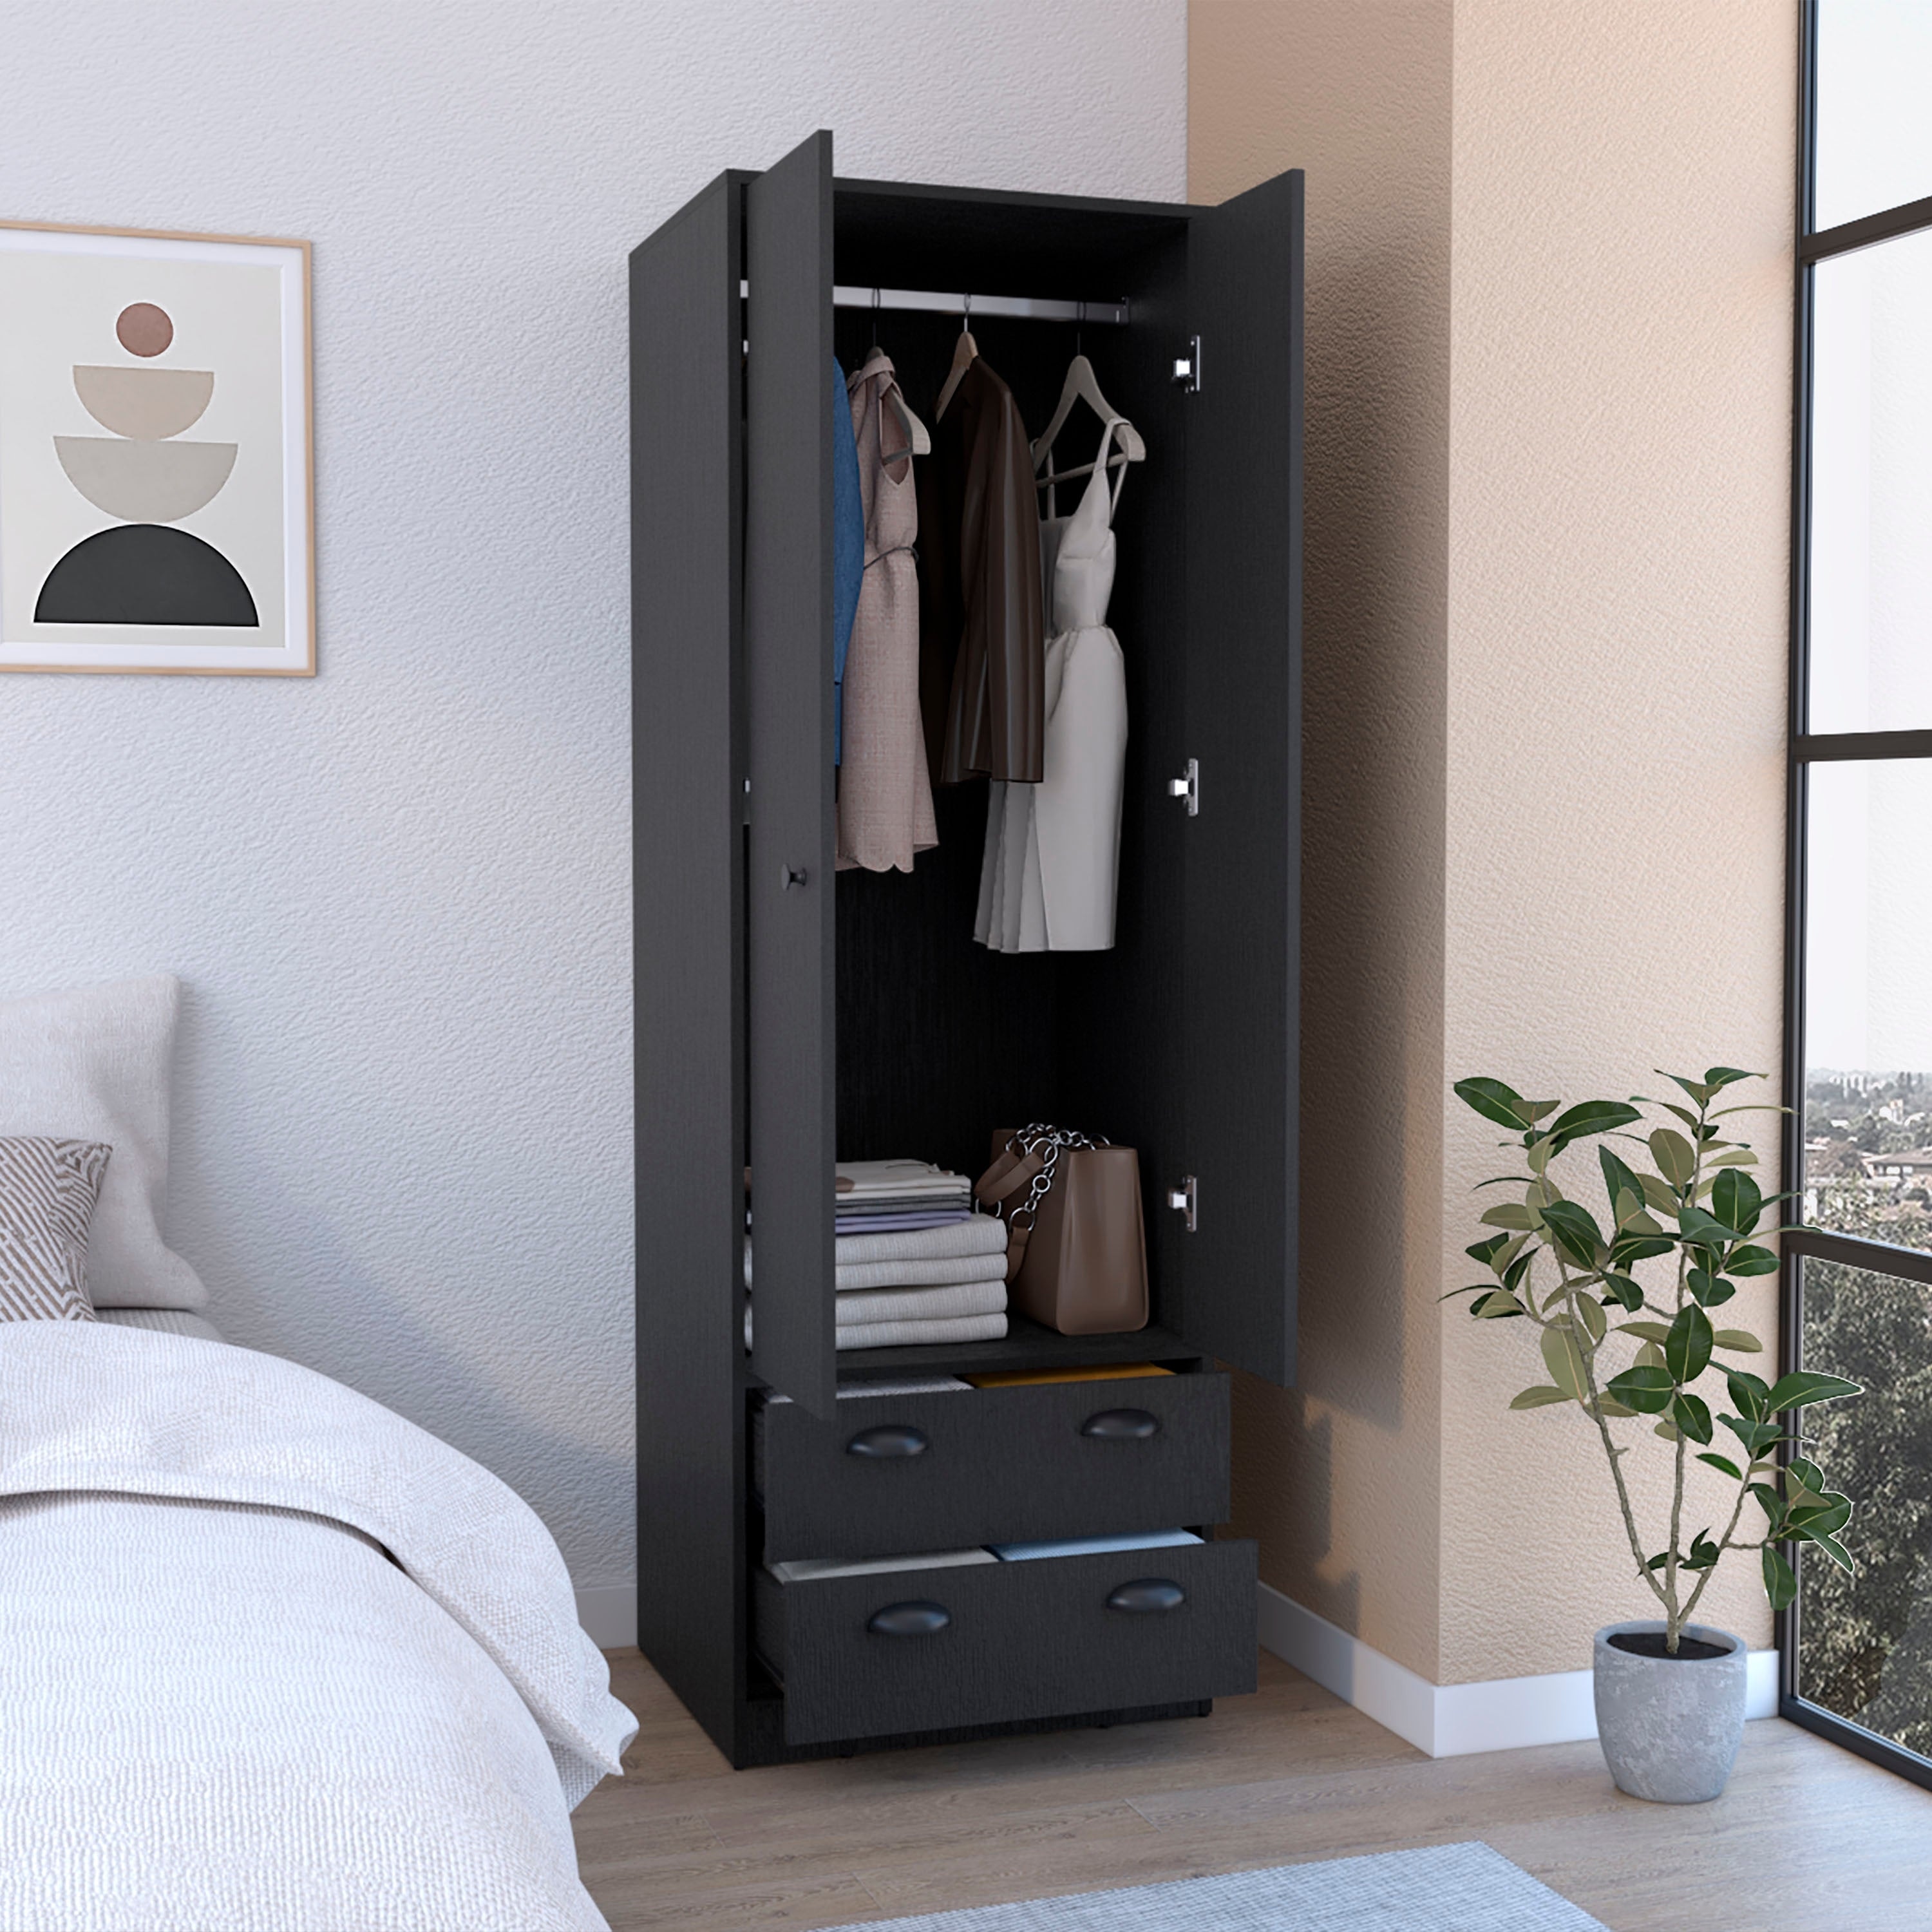 https://ak1.ostkcdn.com/images/products/is/images/direct/1e68ae717ac07cd4e054225fba9d737fe5e2e2cf/Bonaire-Armoire-with-2-Door-Cabinets-and-2-Drawers.jpg